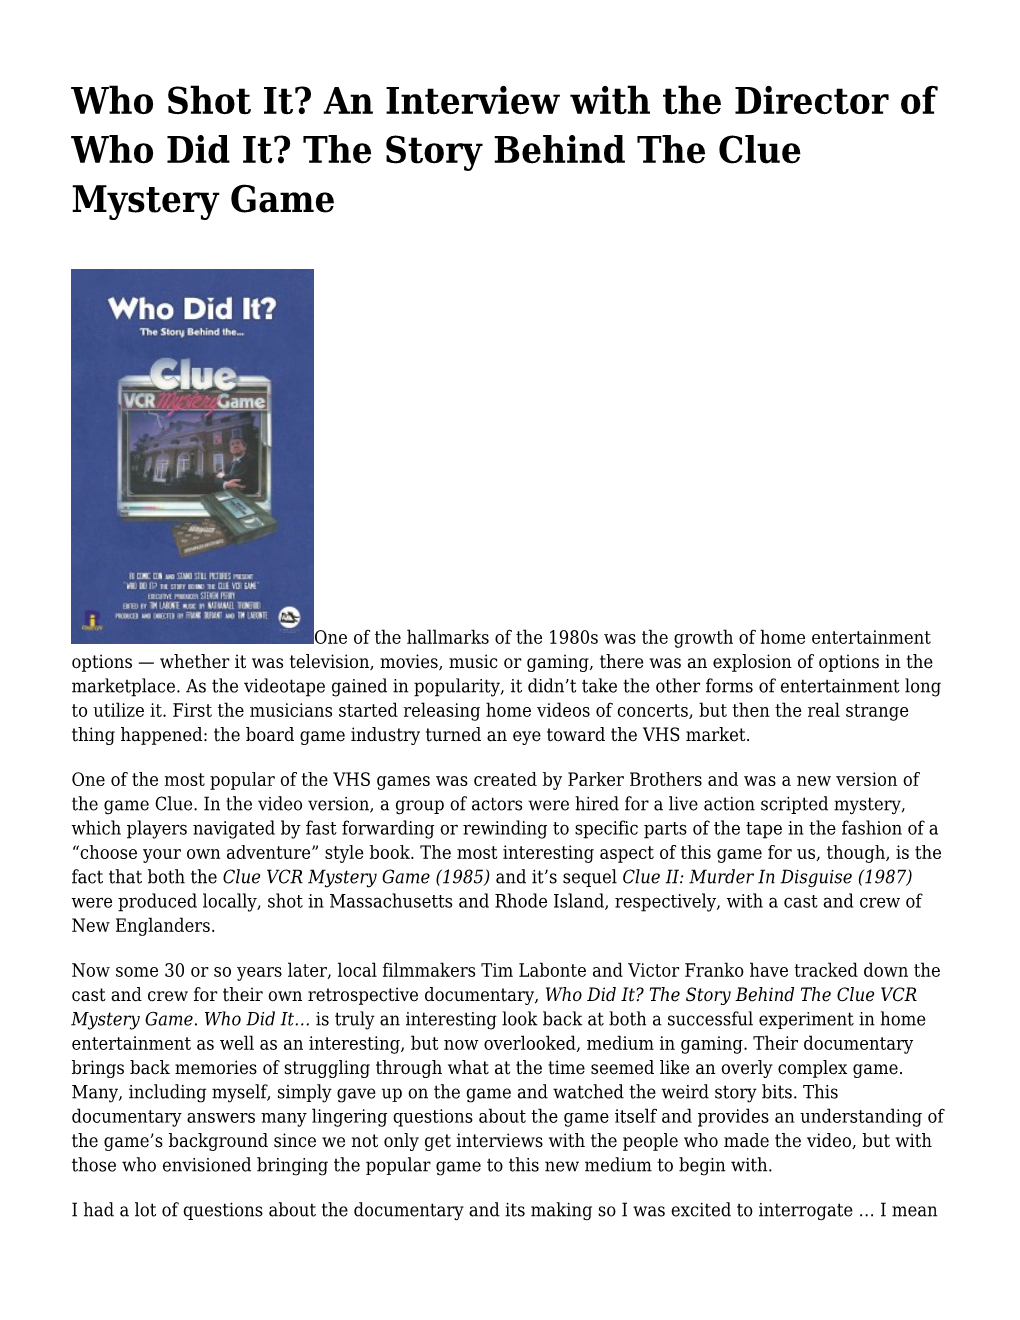 Who Shot It? an Interview with the Director of Who Did It? the Story Behind the Clue Mystery Game